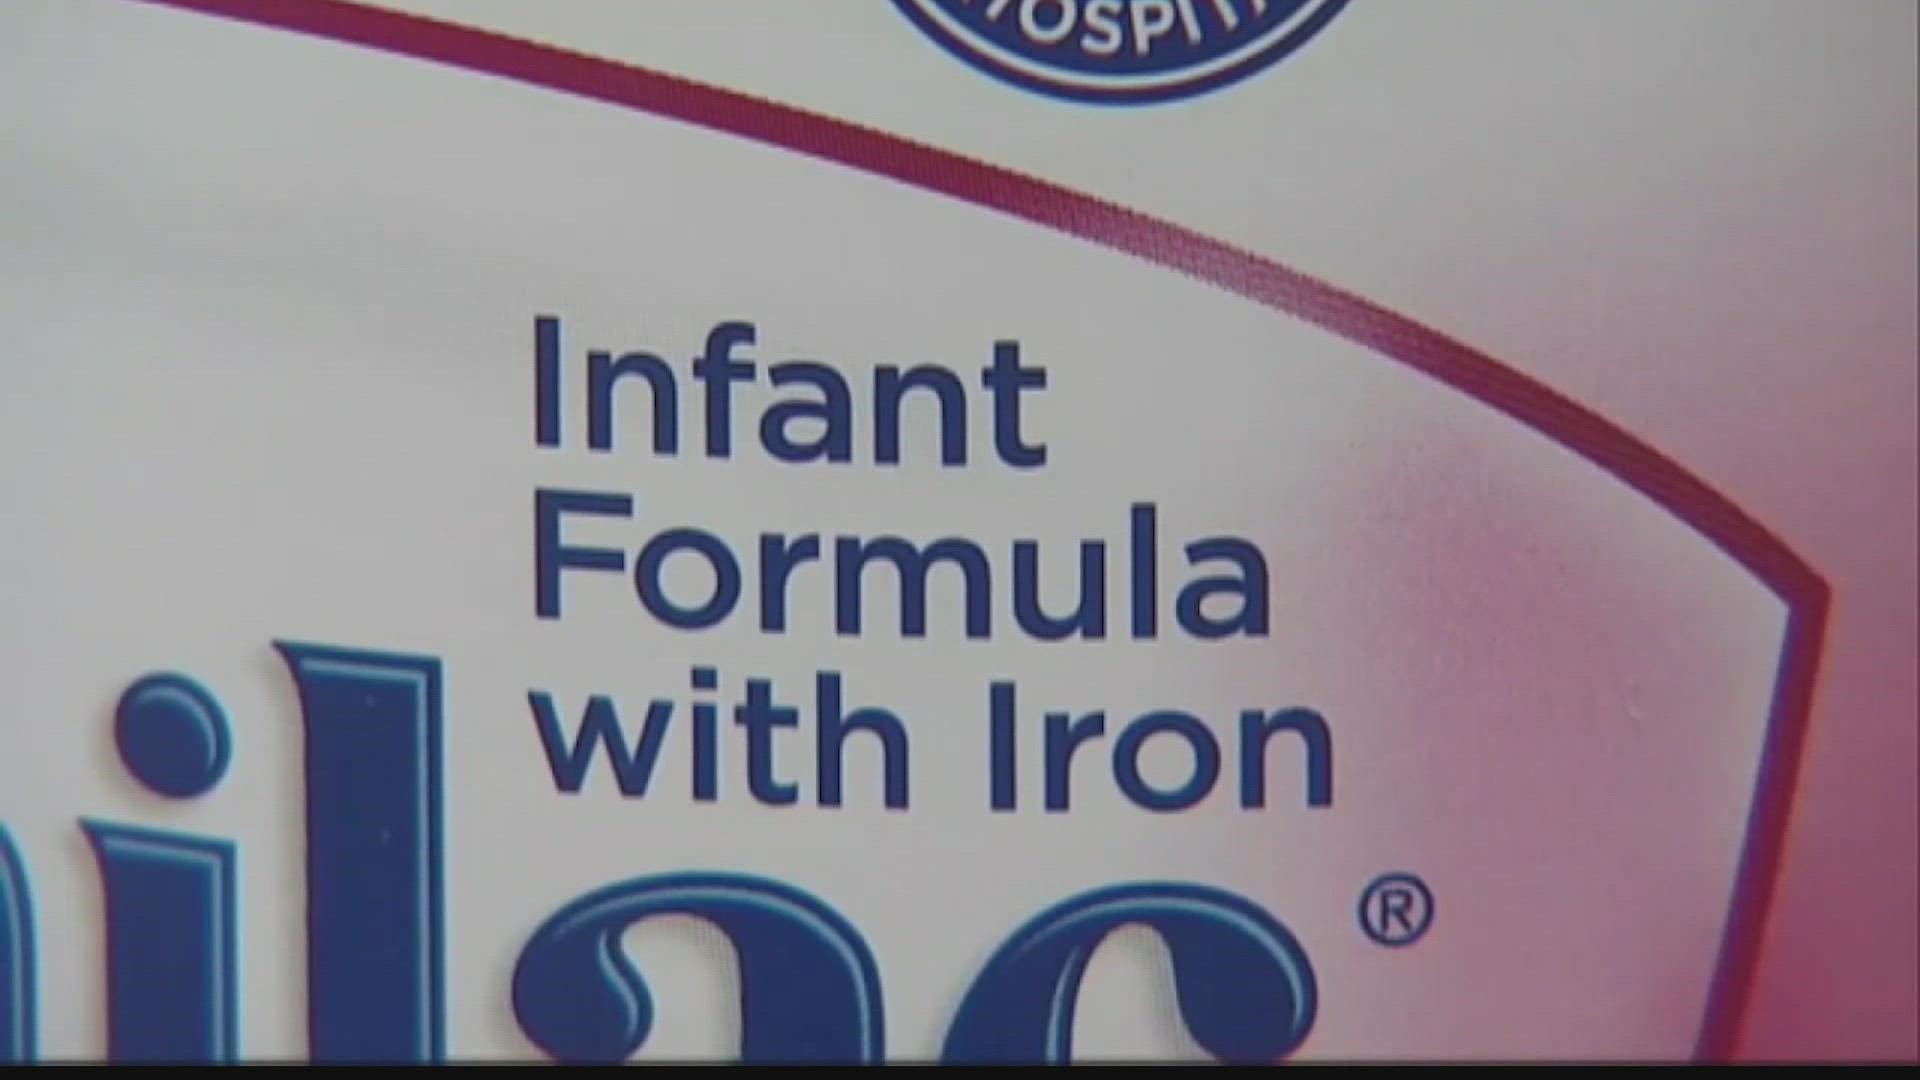 There is a shortage of some baby formula products in the U.S.